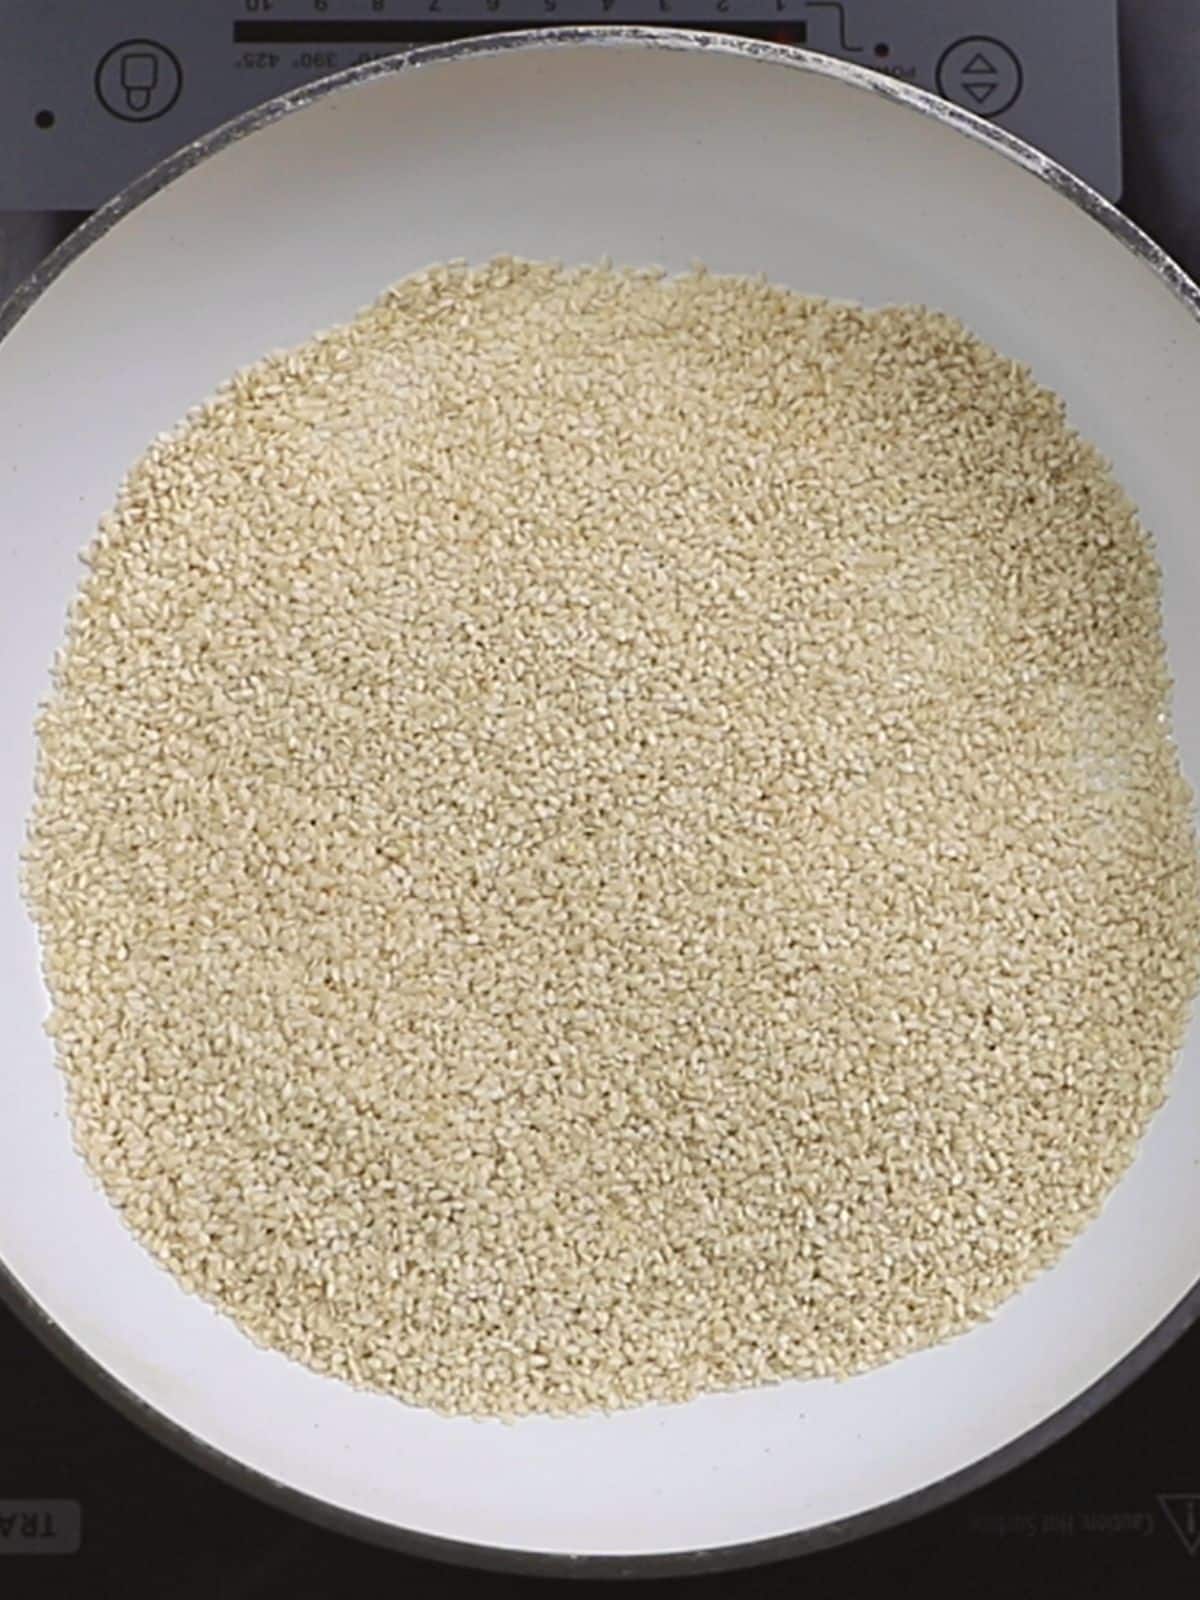 An images showing how to toast raw sesame seeds.